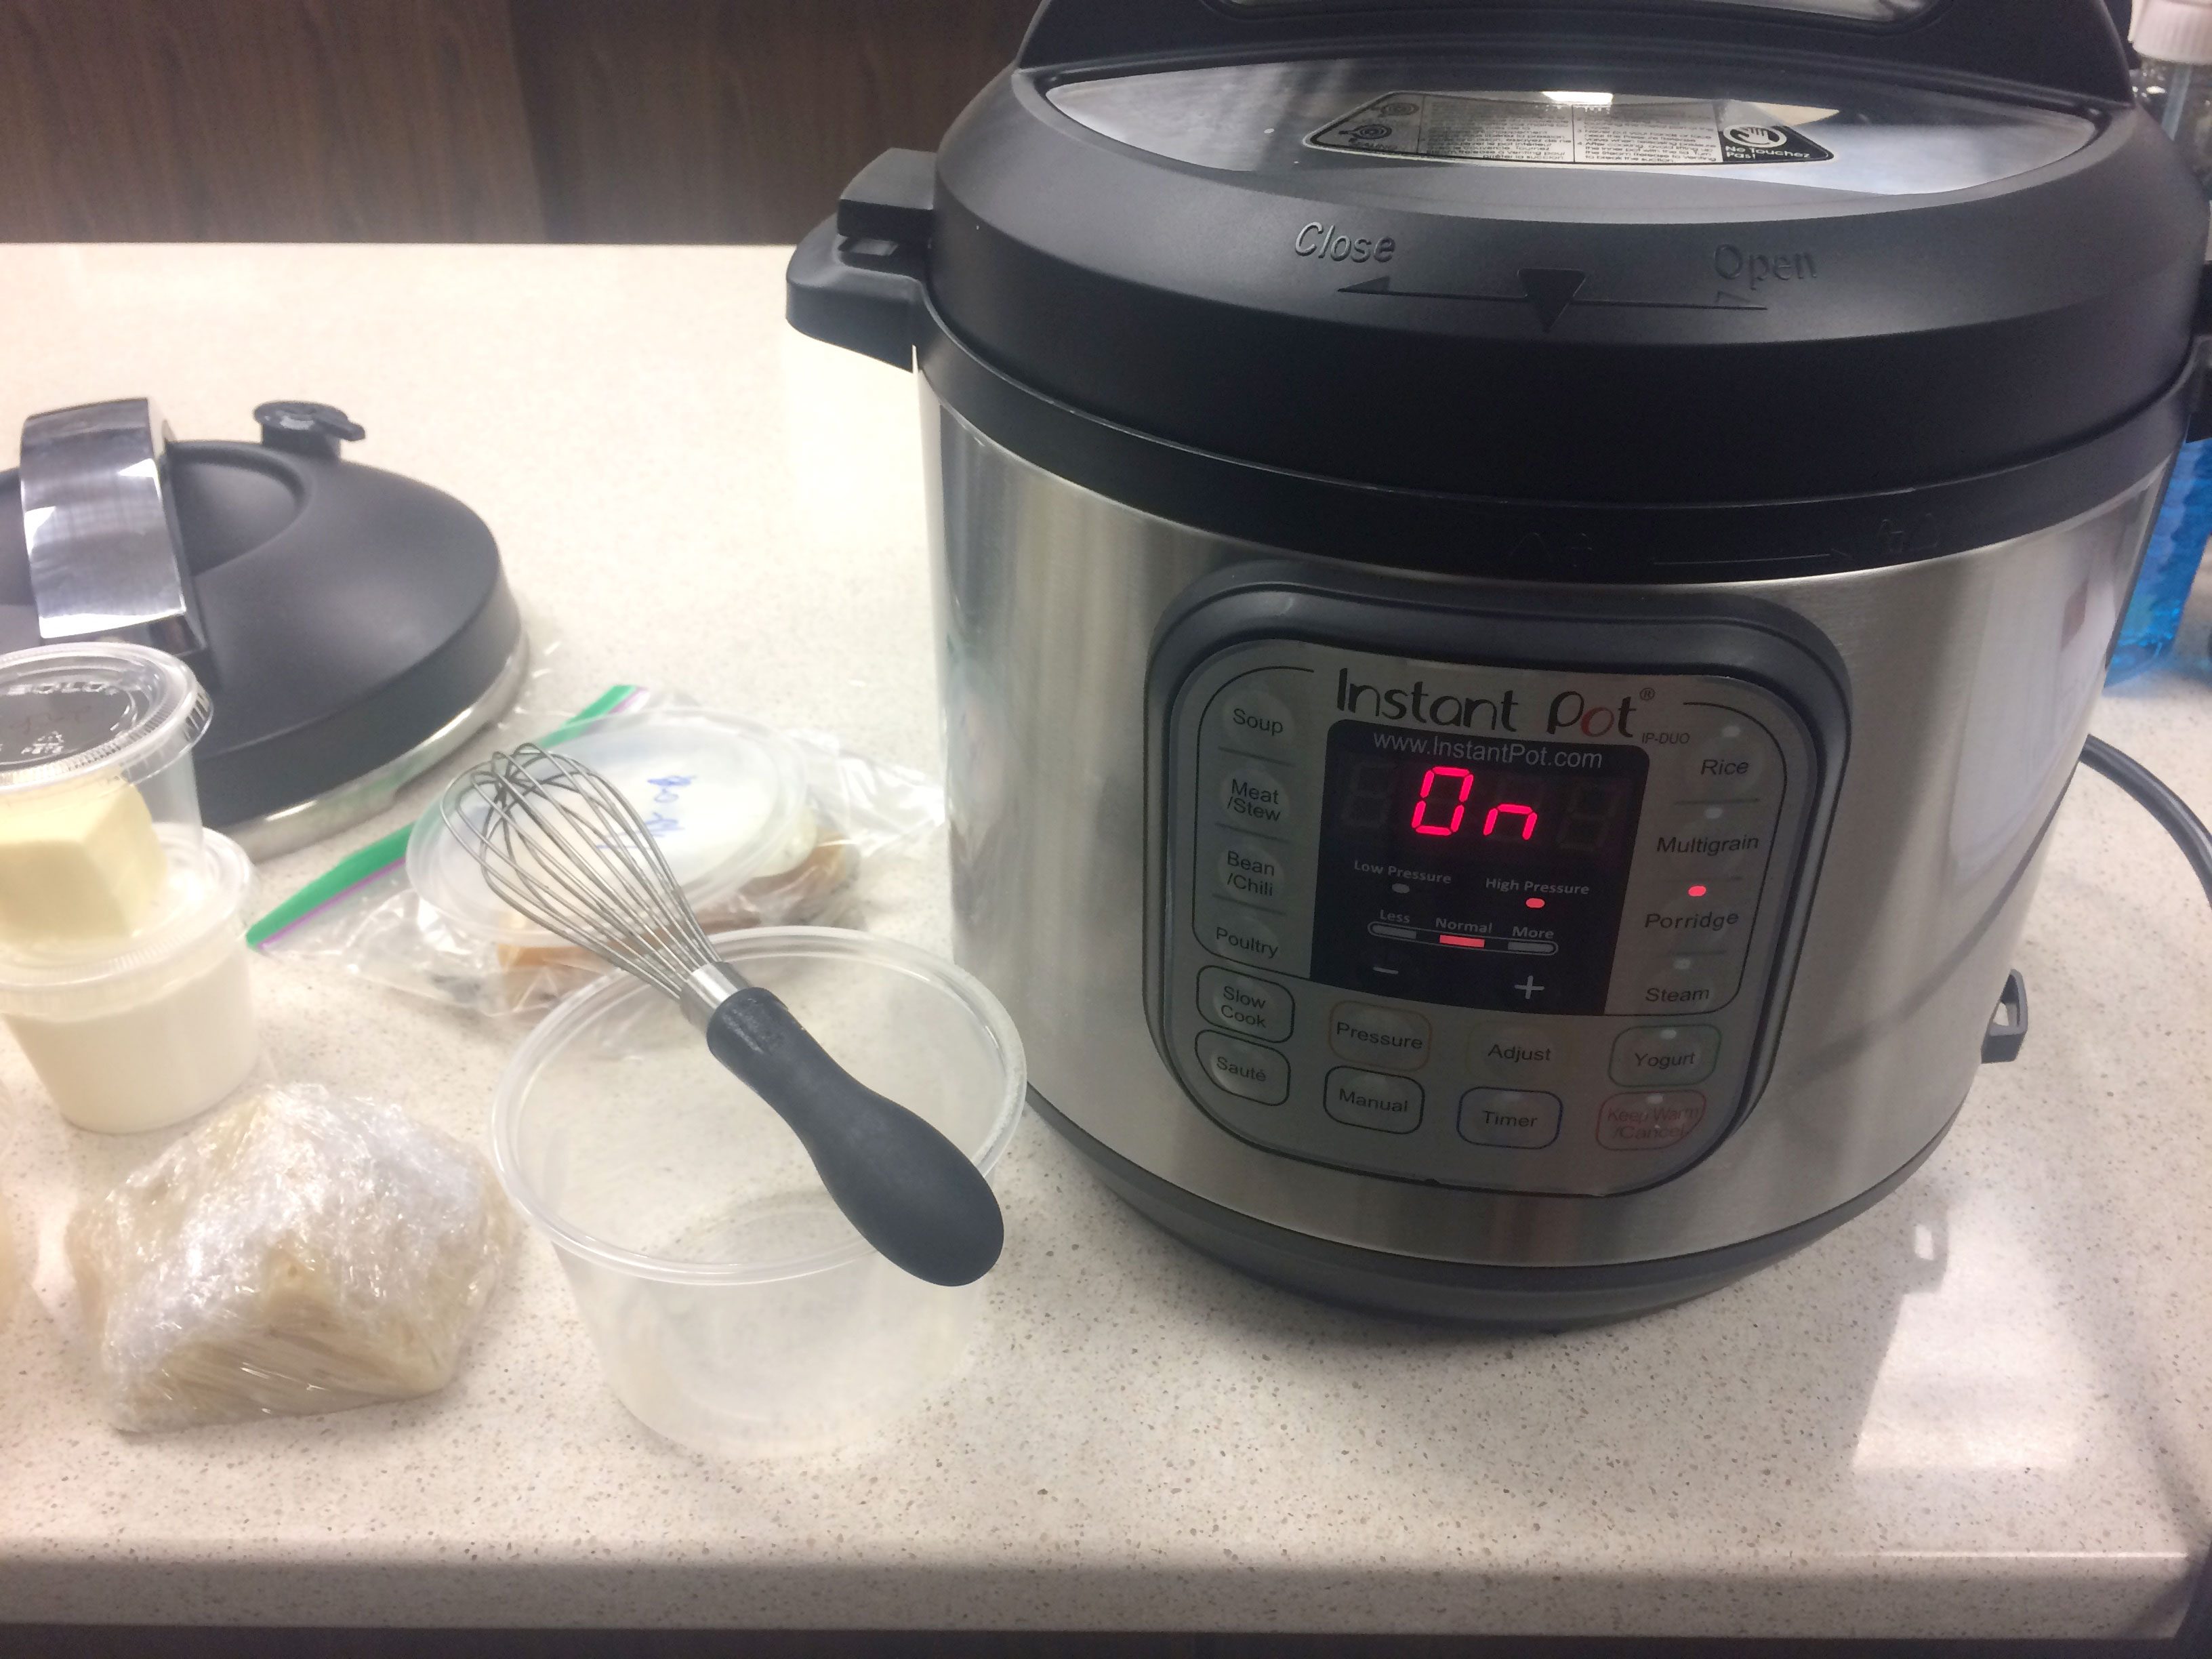 Instant Pot vs Pressure Cooker: Which is Better? - A Food Lover's